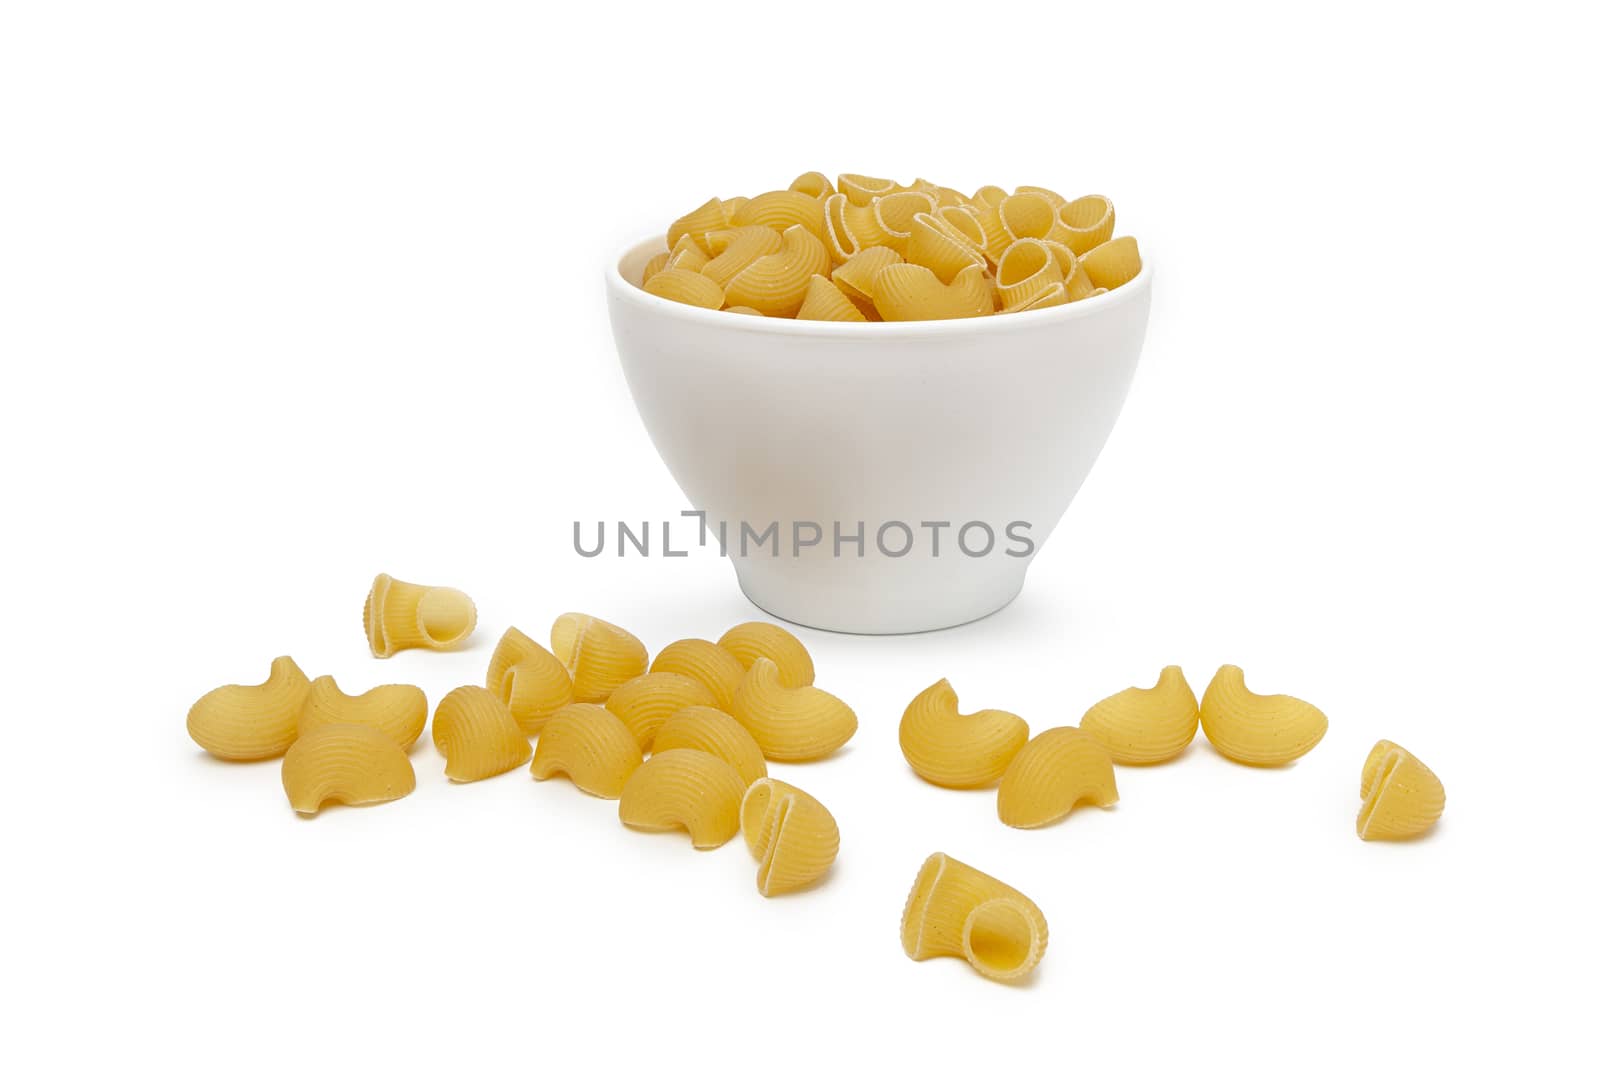 Pasta Pipe Rigate in a white bowl. Isolated on a white background